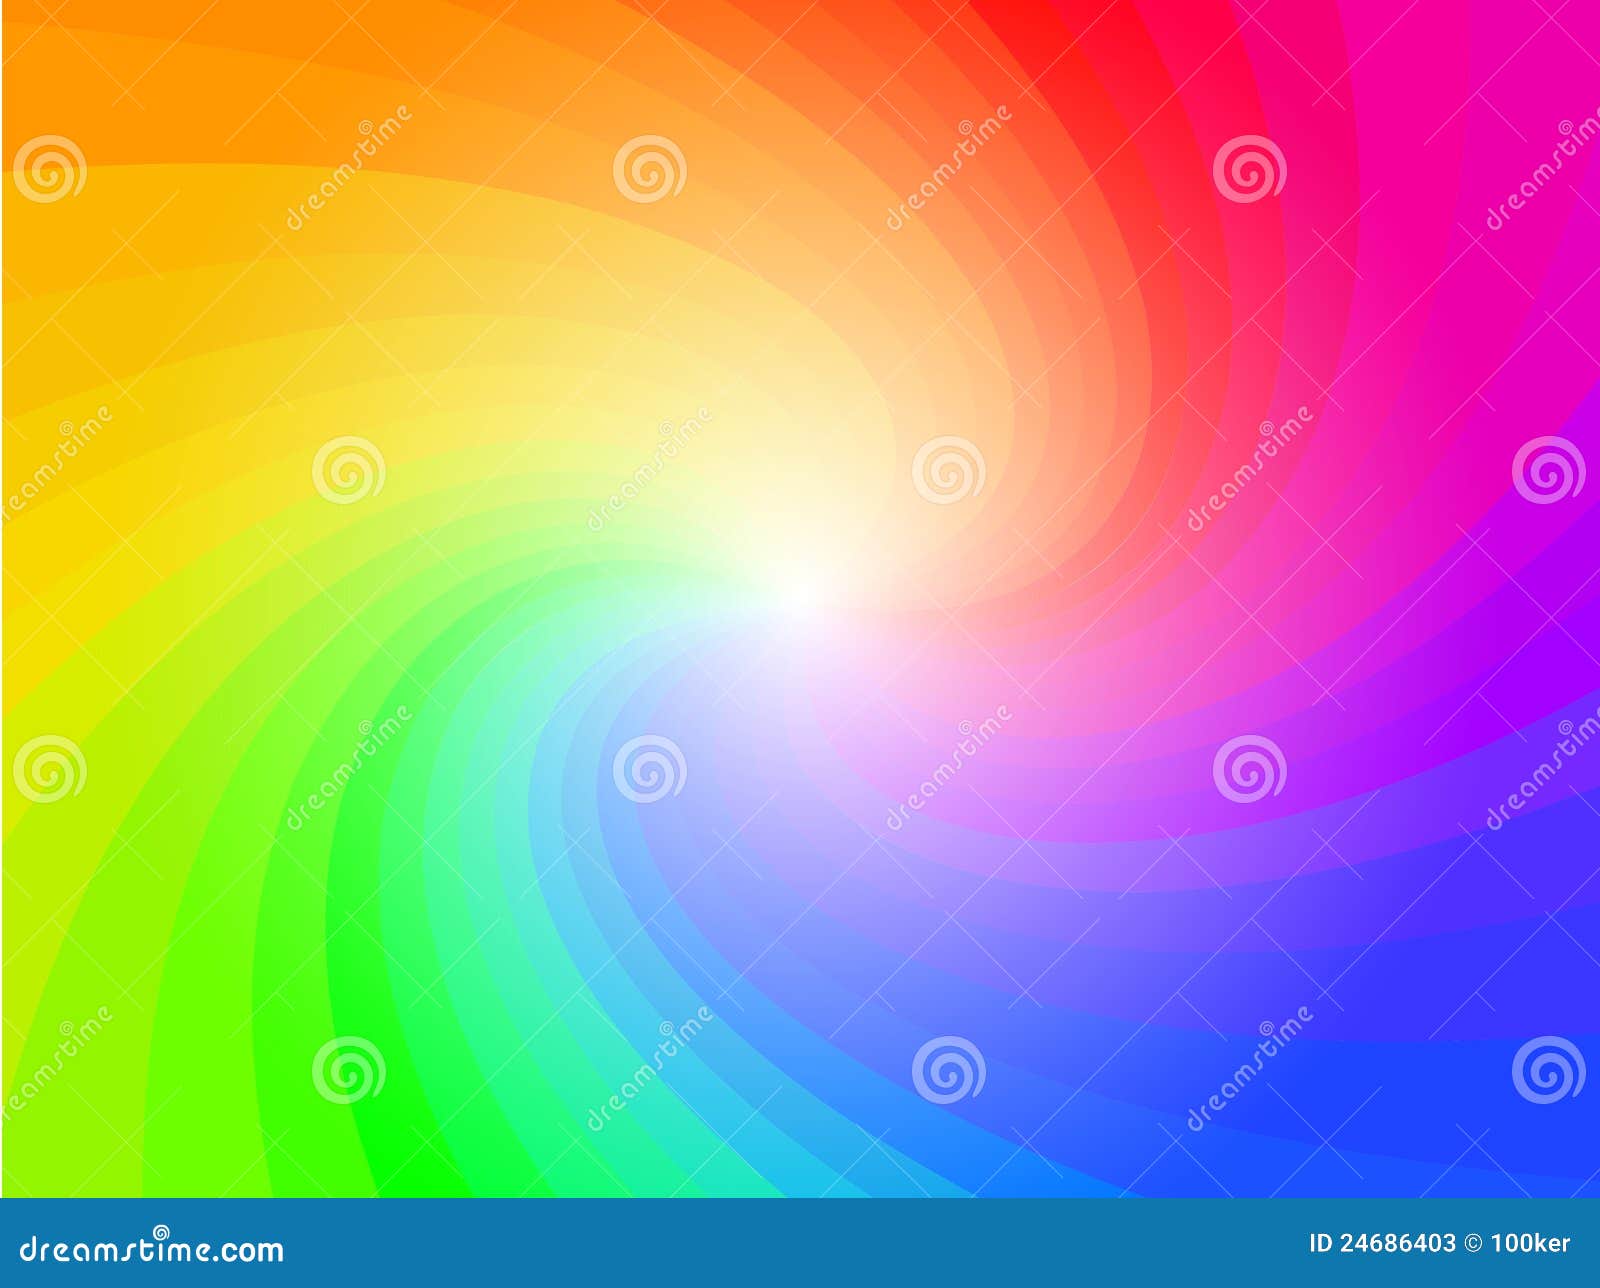 abstract rainbow colorful pattern background